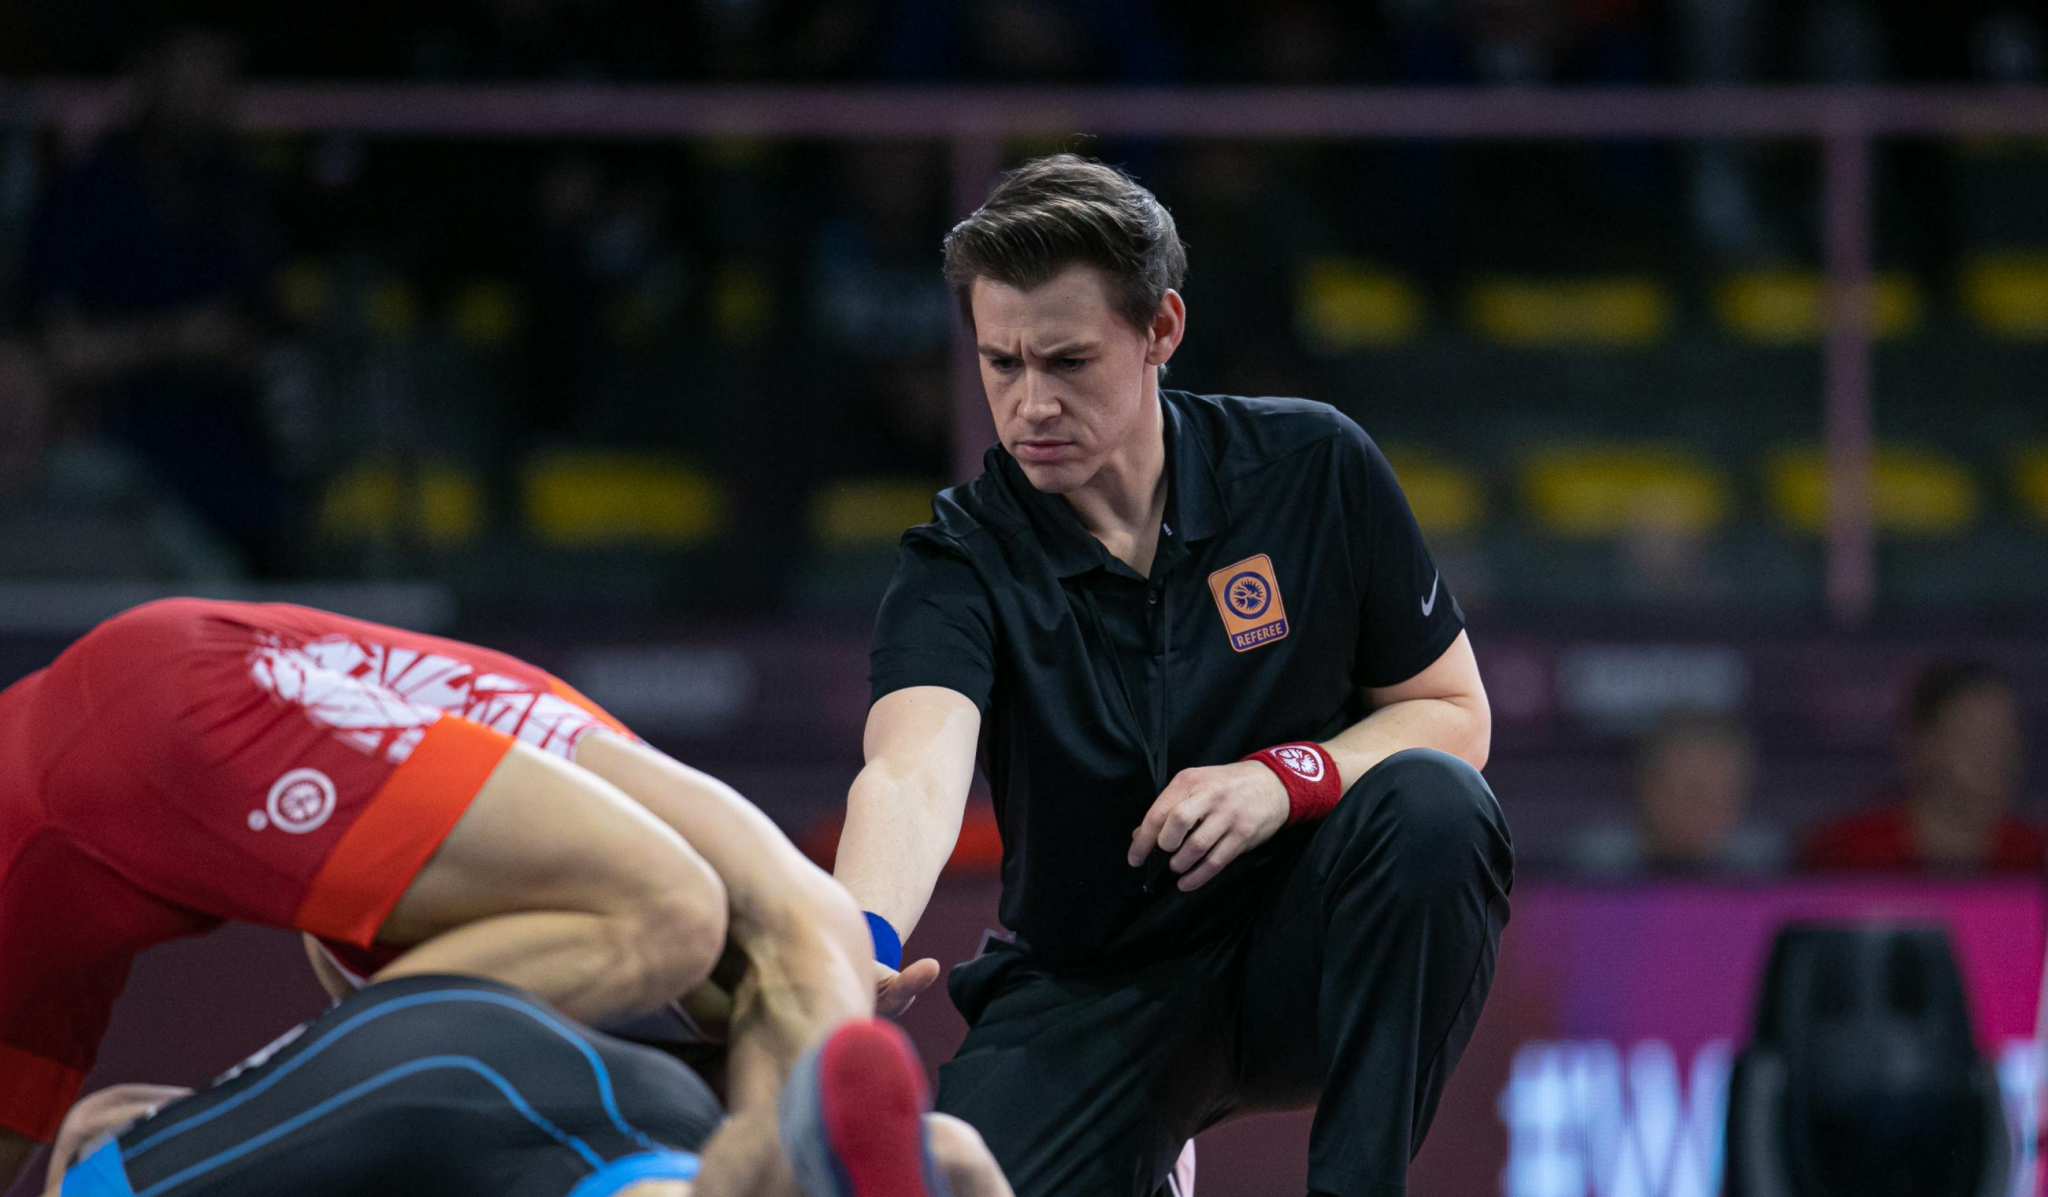 United World Wrestling announces referee programme to reduce injury risk